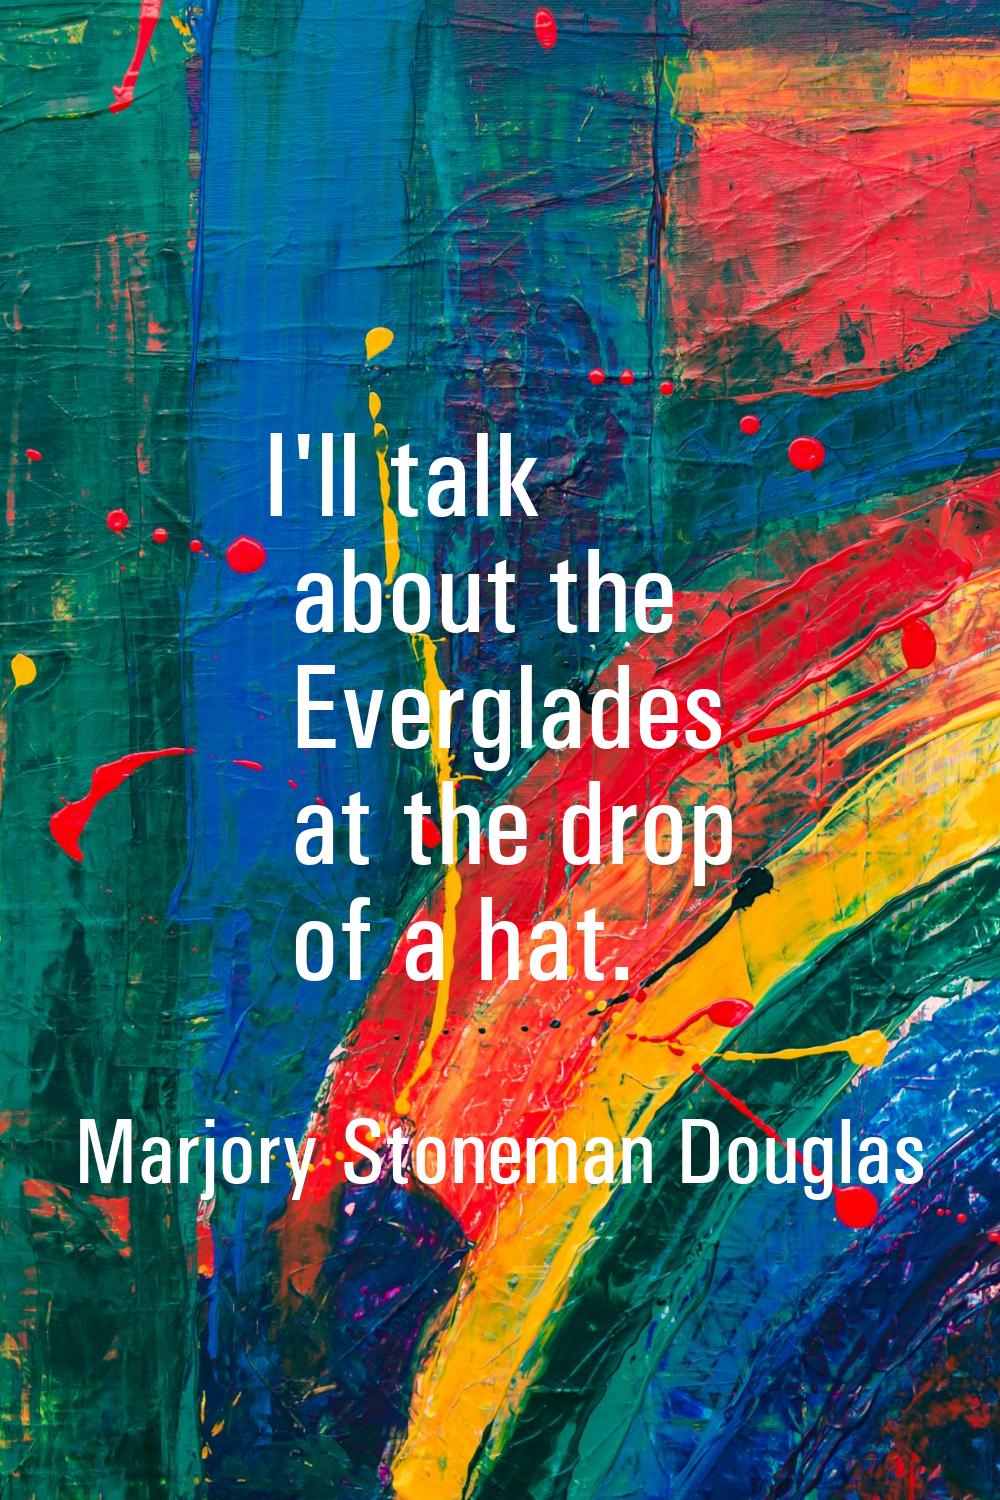 I'll talk about the Everglades at the drop of a hat.